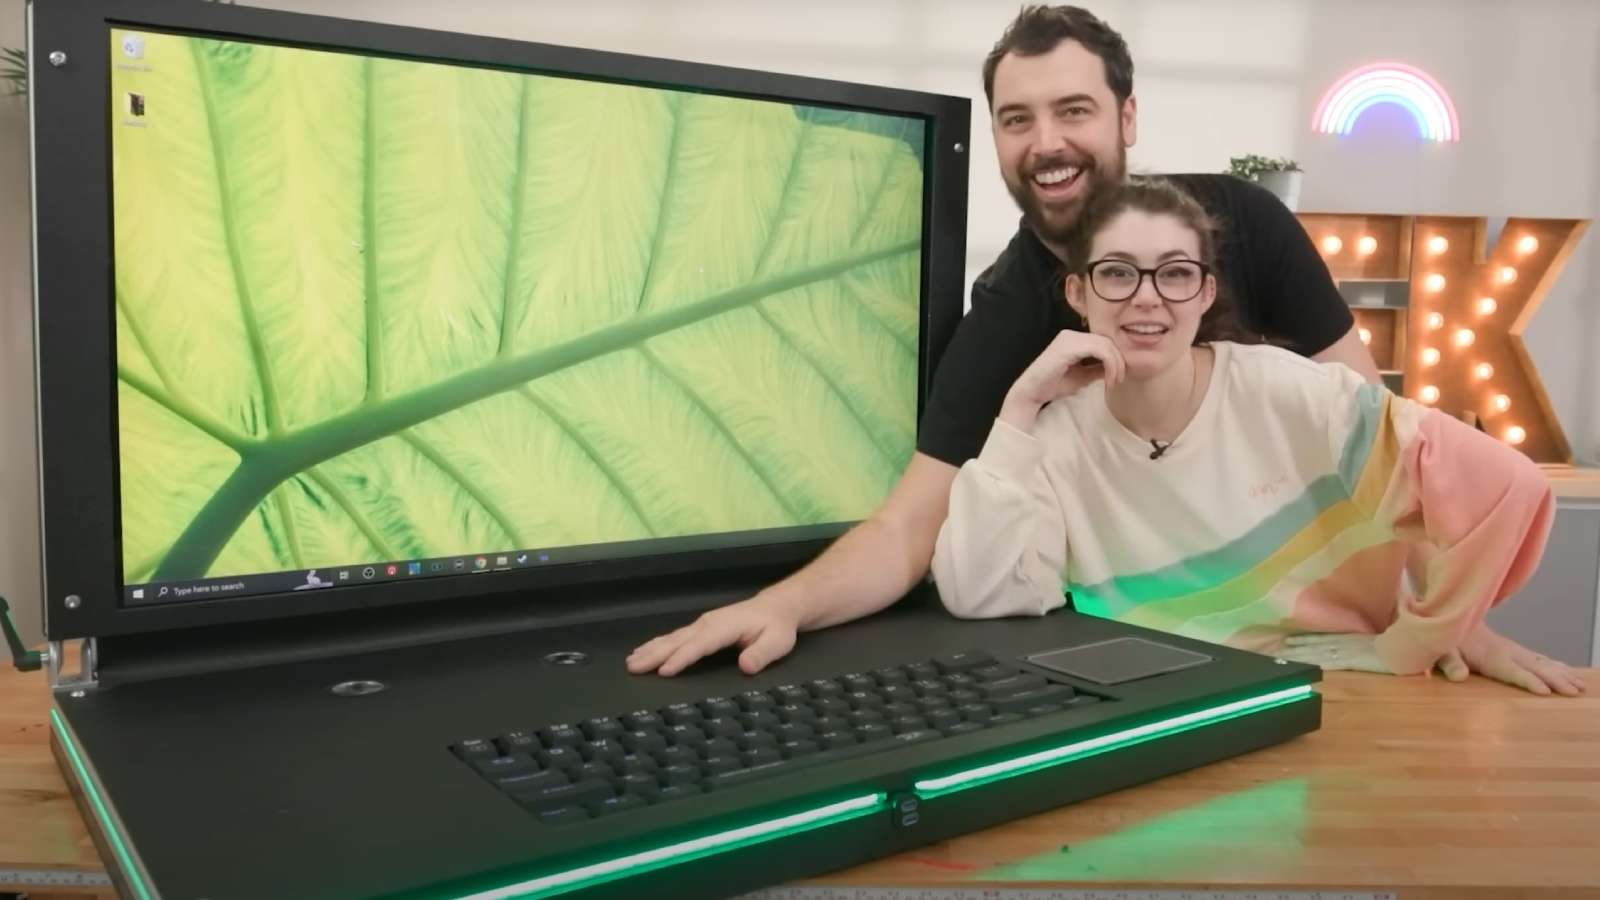 YouTubers posing with their DIY world's biggest laptop